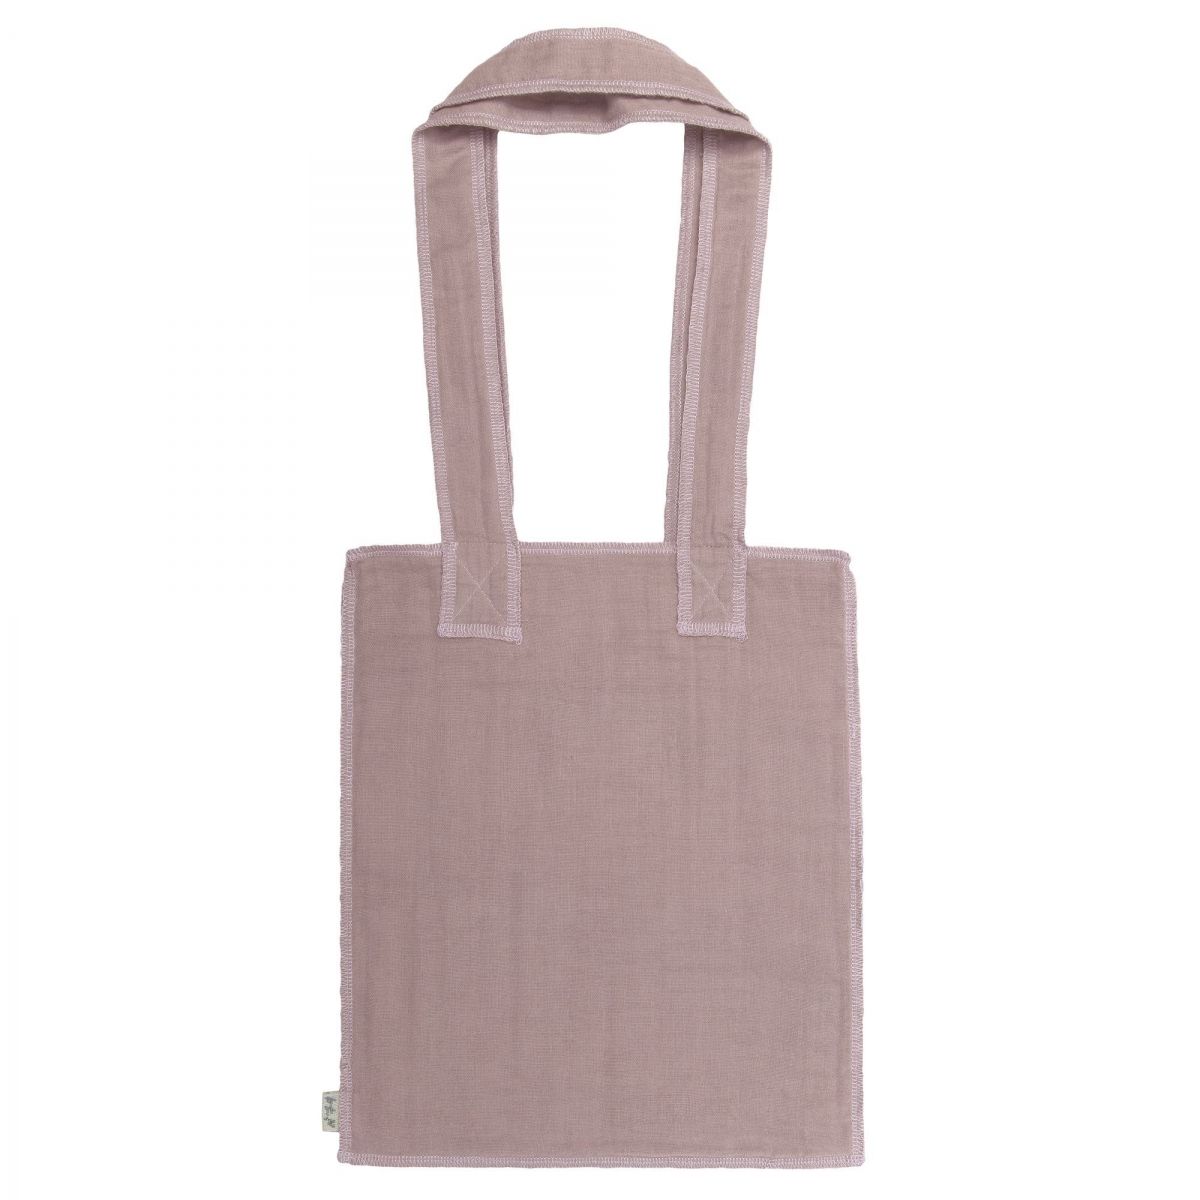 Numero 74 Tote Bag dusty pink  